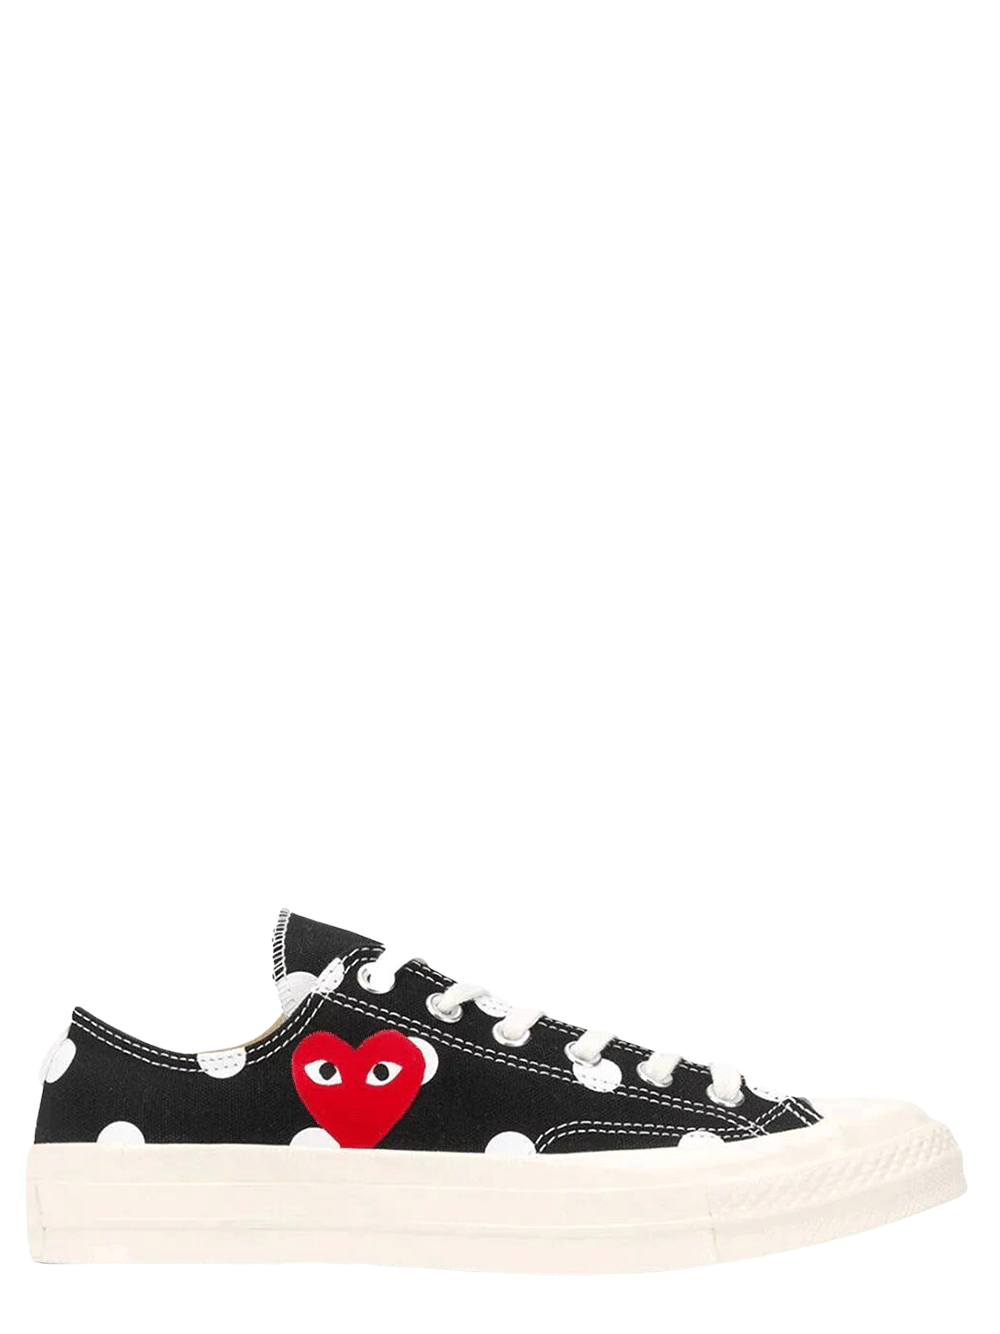 COMME-des-GARCONS-PLAY-Converse-Converse-Low-Cut-With-Polka-Dot-Sneakers-Black-1